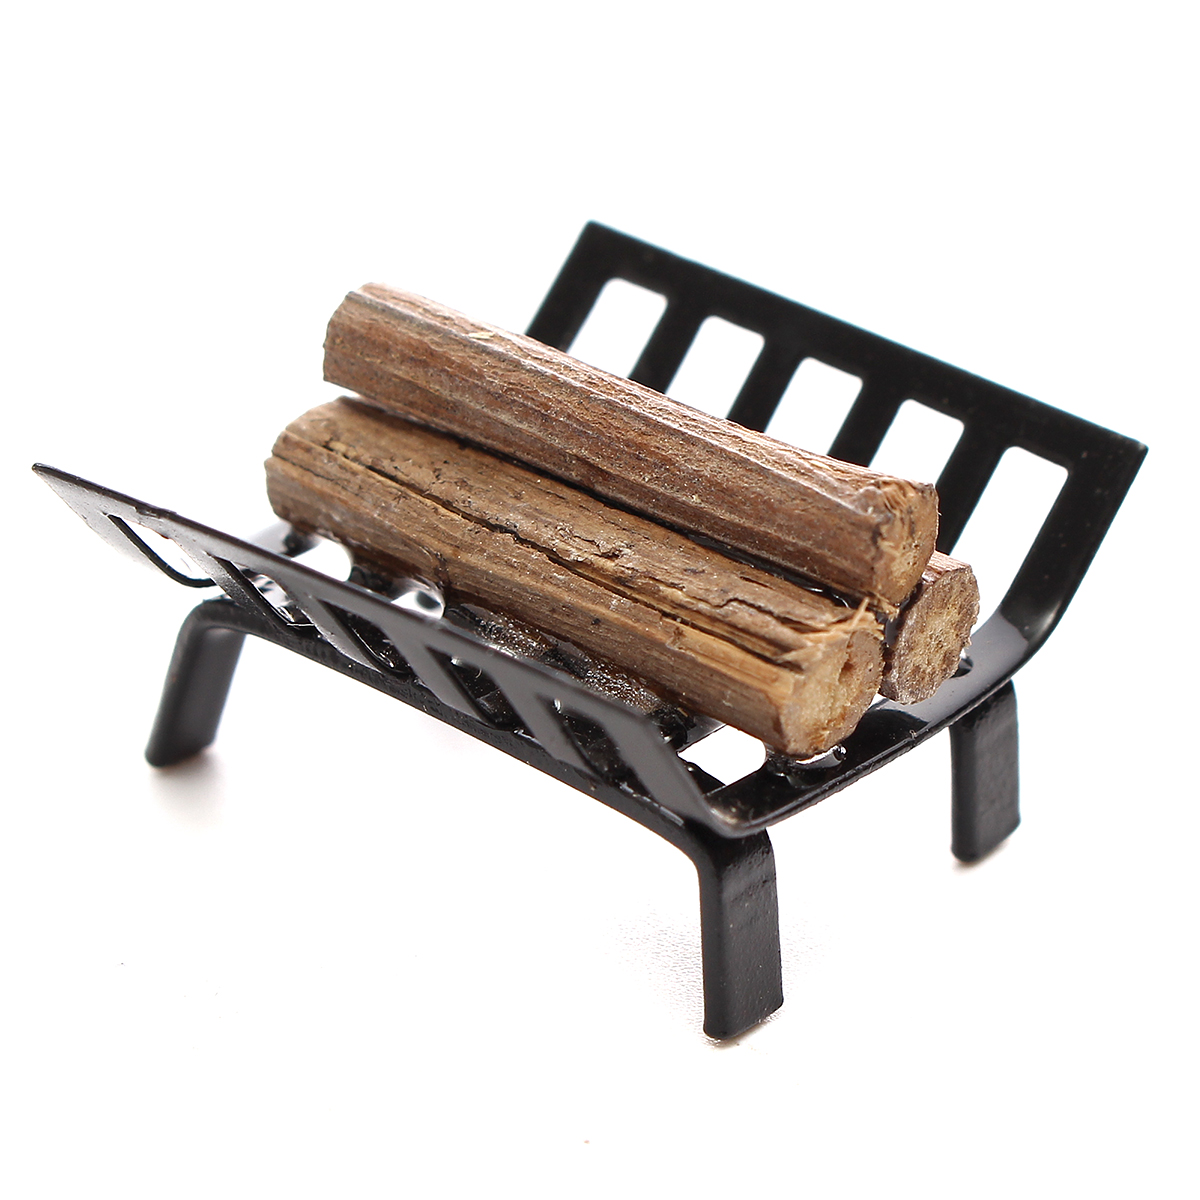 

NEW Firewood Dollhouse Miniature Kitchen Furniture Accessories For Home Decor